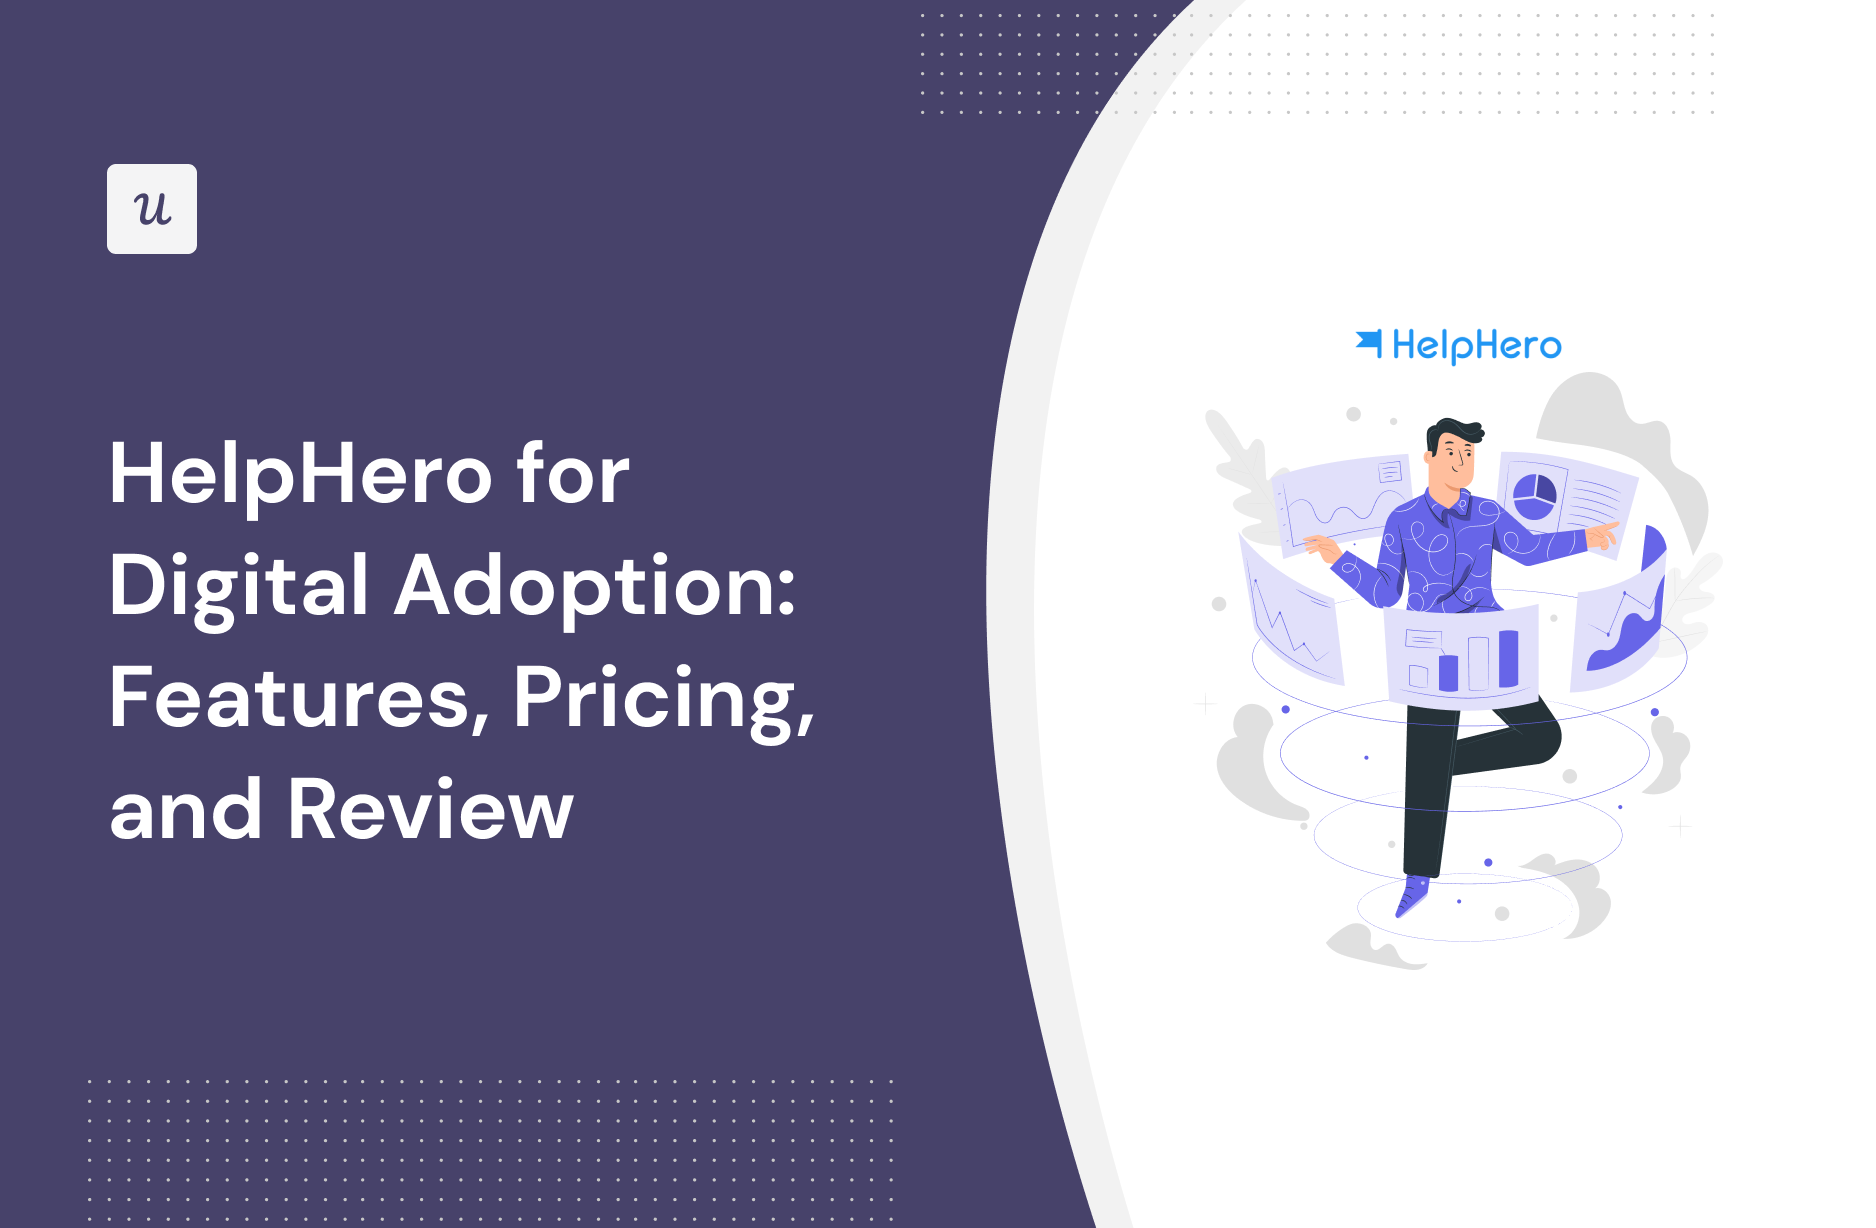 HelpHero for Digital Adoption: Features, Pricing, and Review